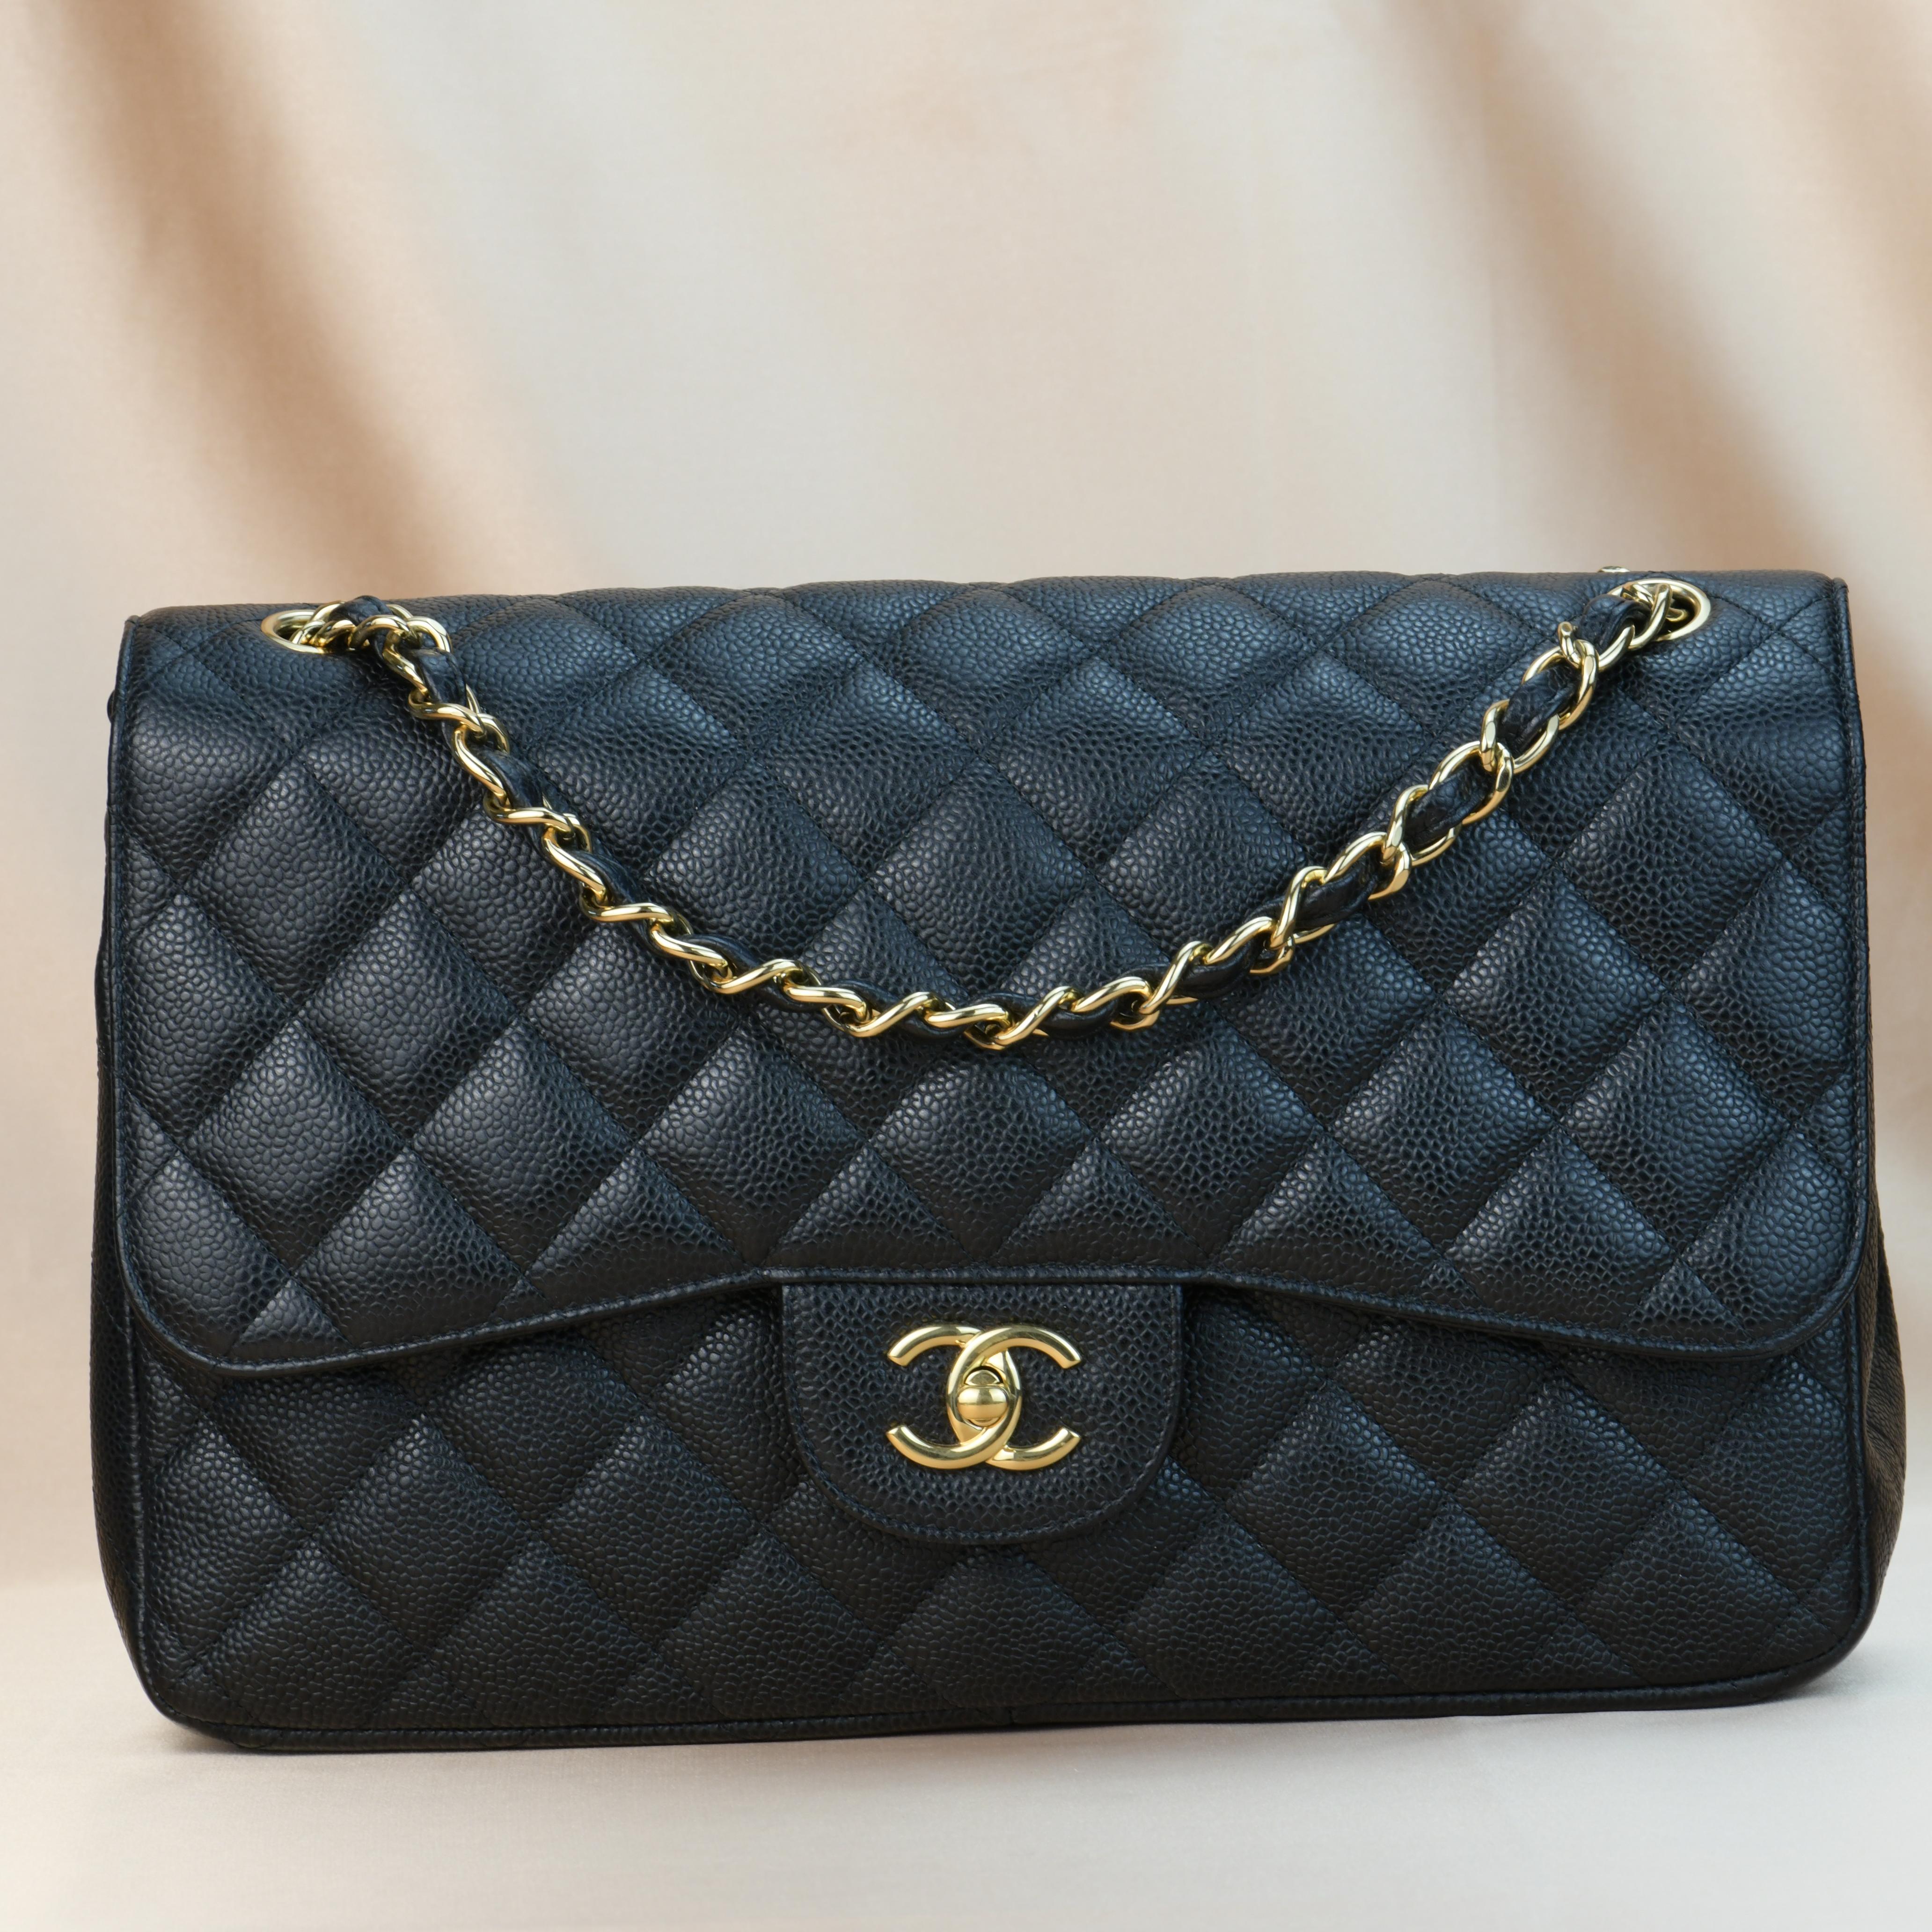 Brand	Chanel
Model	Timeless Classic Double Flap 
Serial No.	15******
Color	Black
Date	Approx. 2012
Metal	Gold
Material	Calfskin Caviar Leather
Measurements	Approx. 11.8in  x 7.9in  x 3.9in 
Condition	Excellent 
Comes with	Chanel Dust bag / authentic